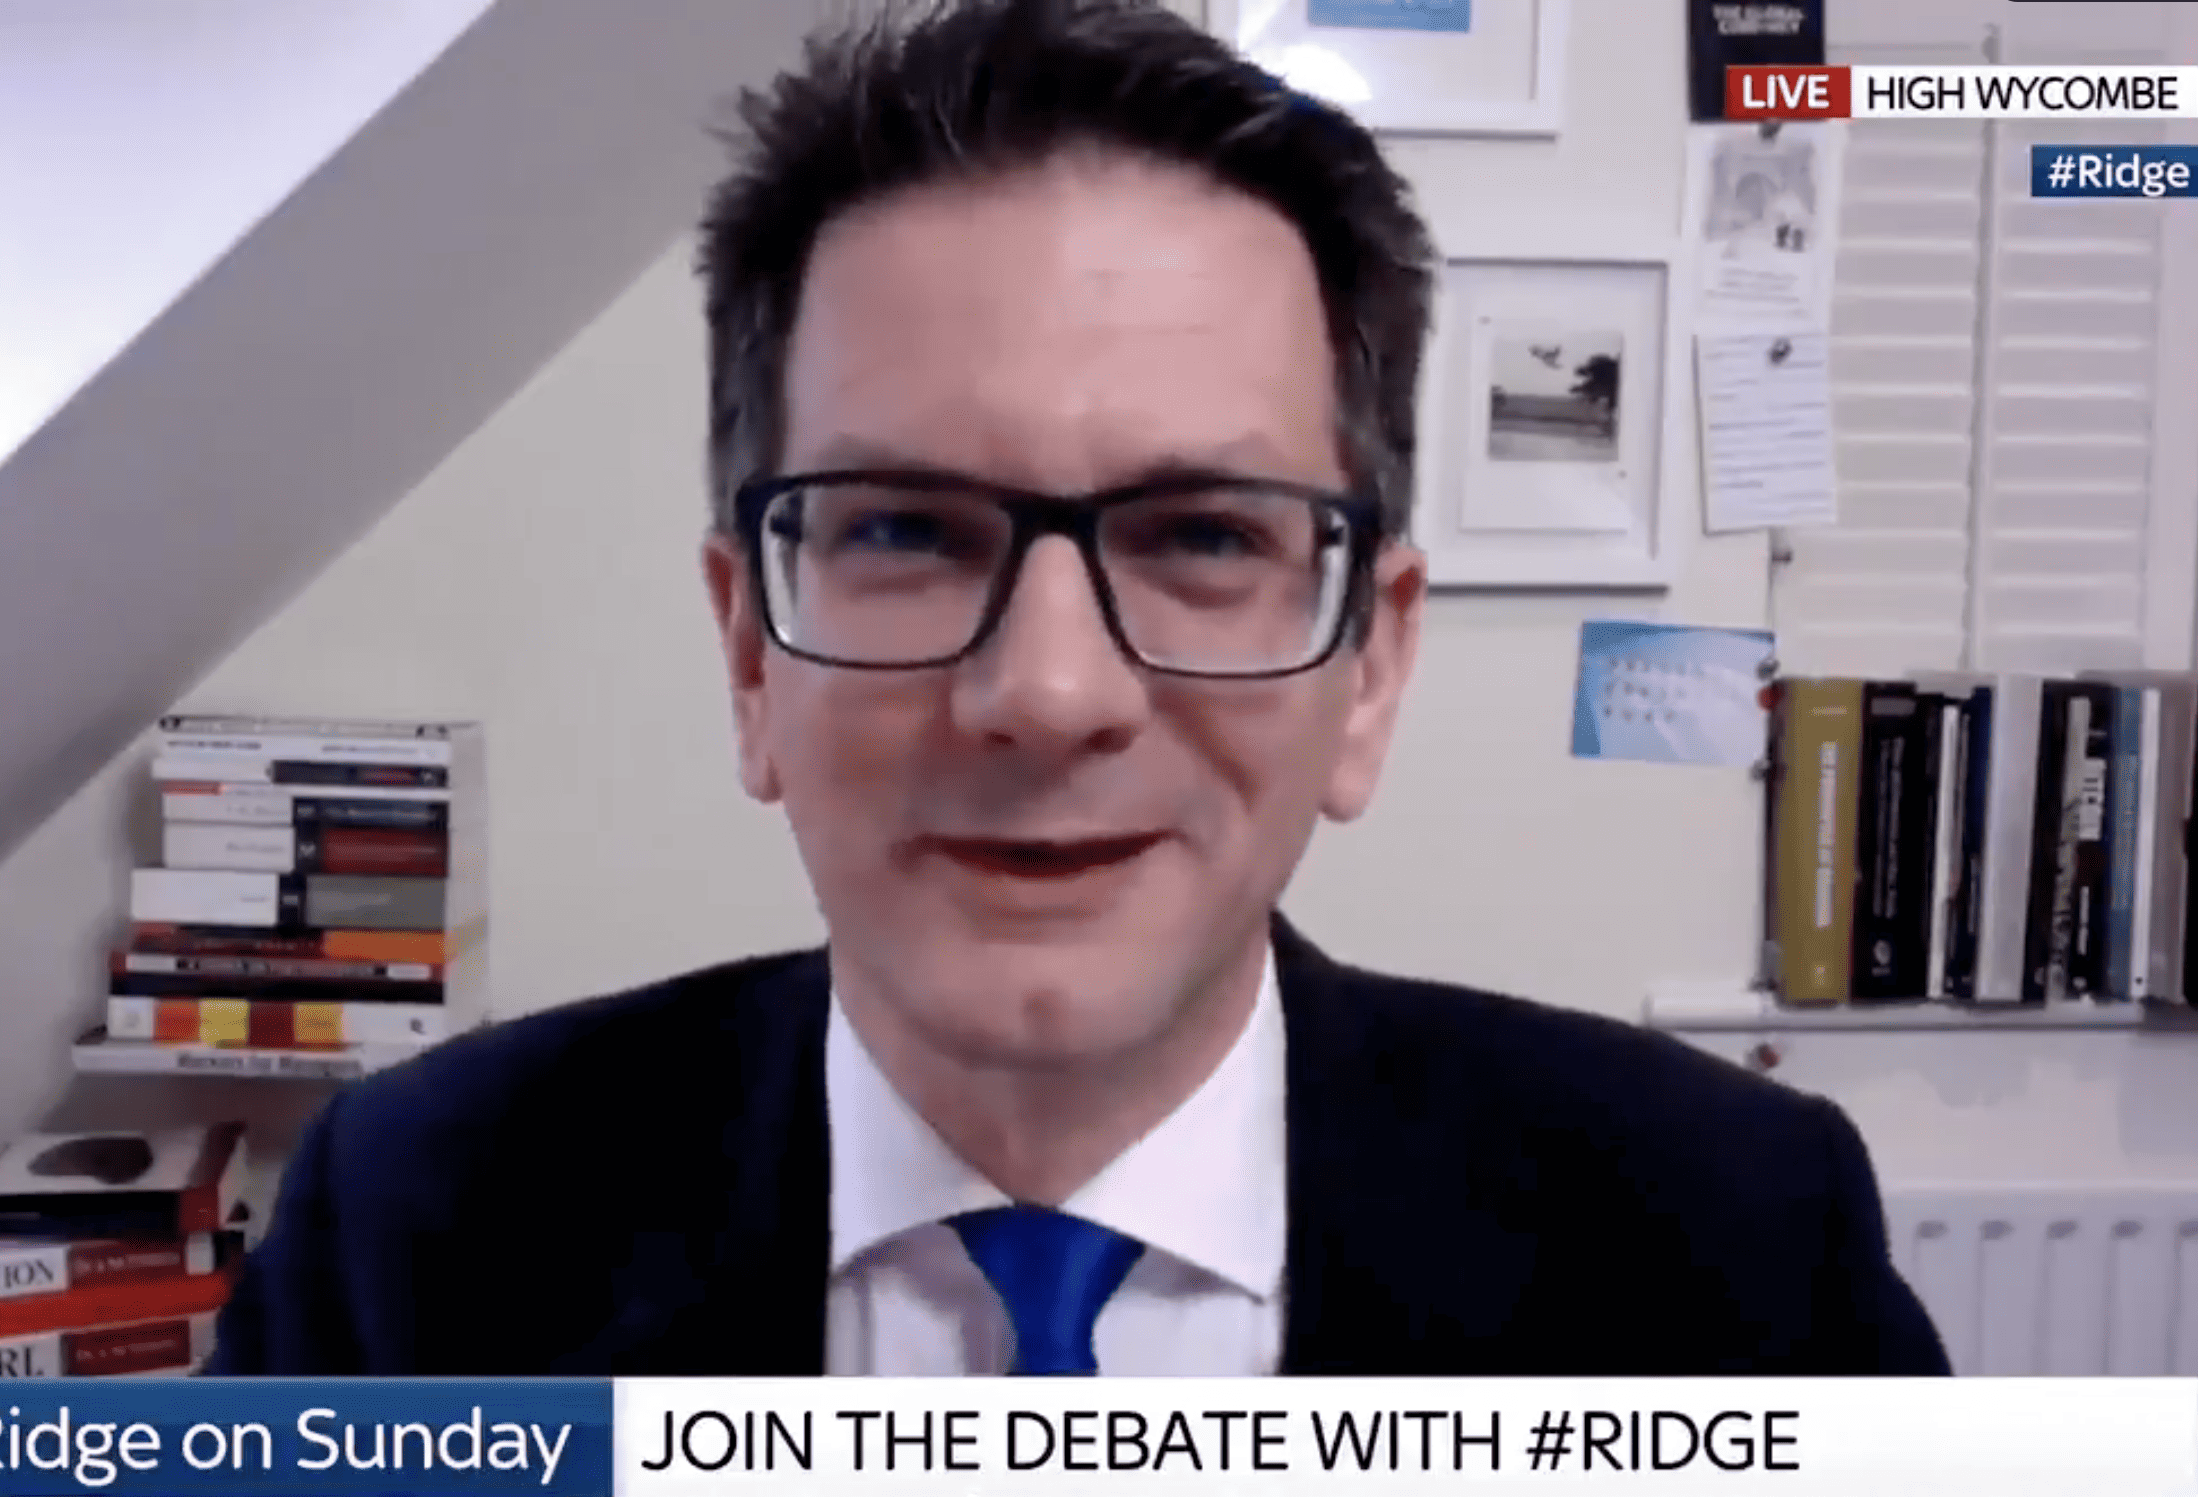 This Steve Baker interview explains Tory meddling with the BBC